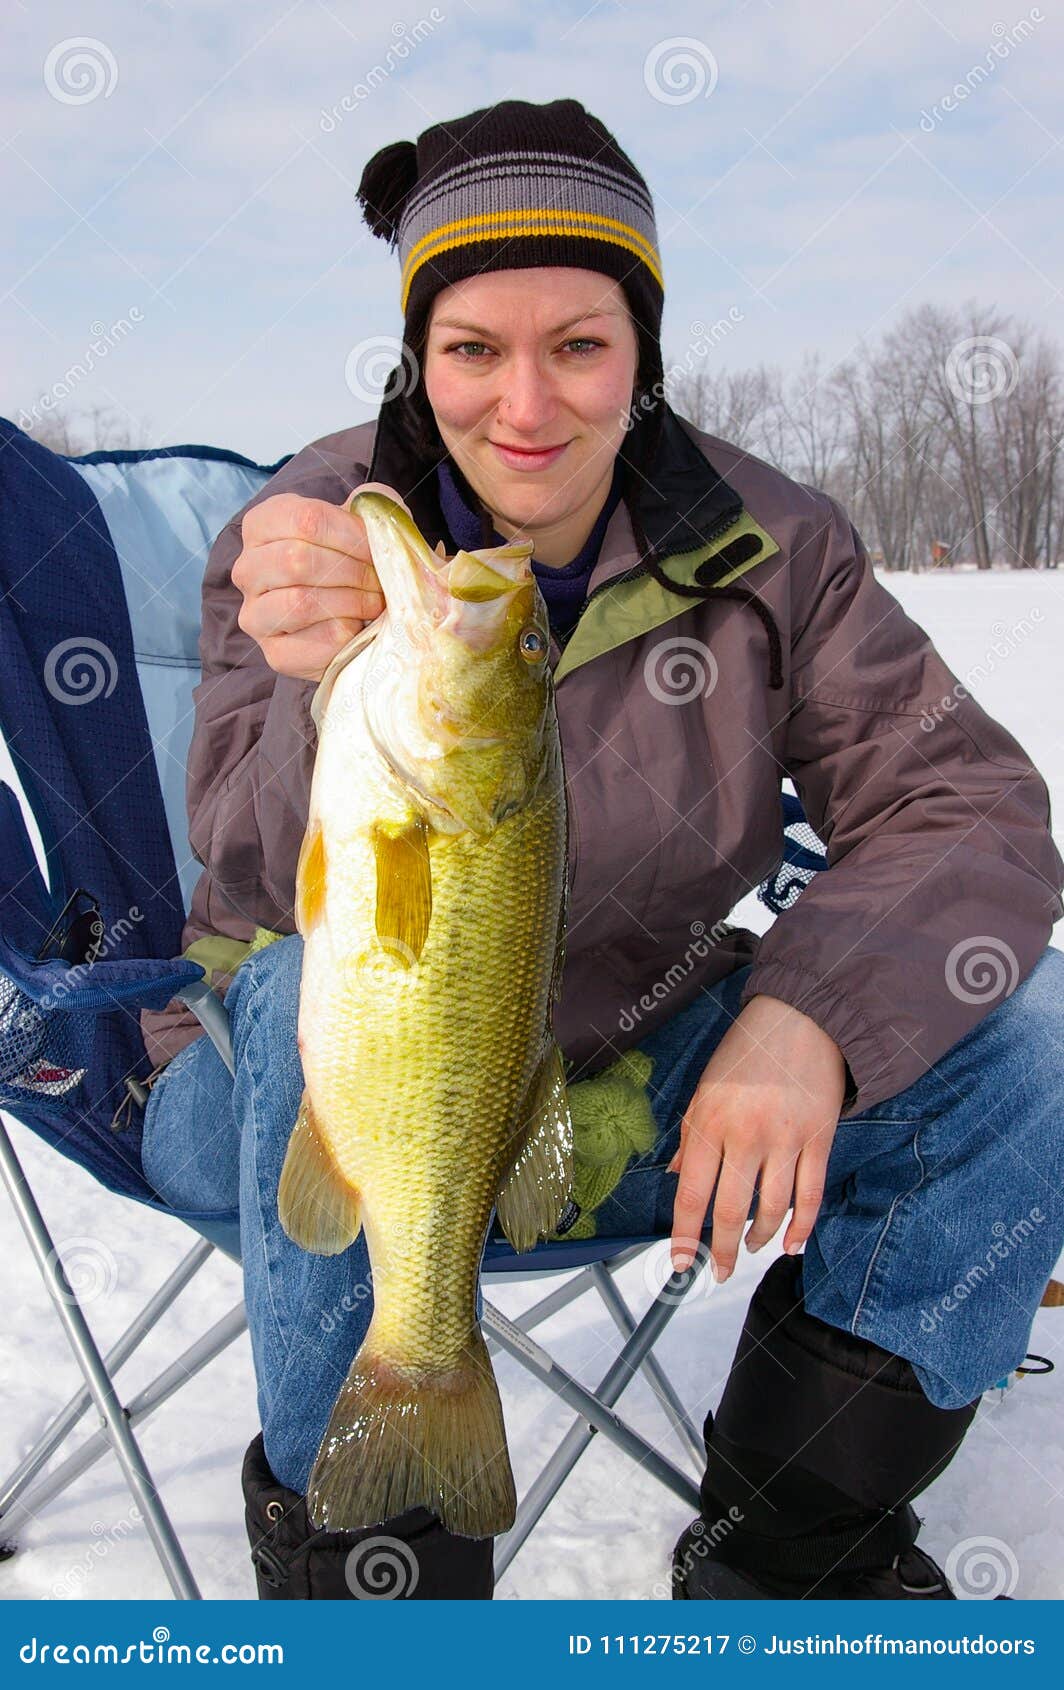 lady angler fisherwoman holds a large mouth bass caught ice fishing